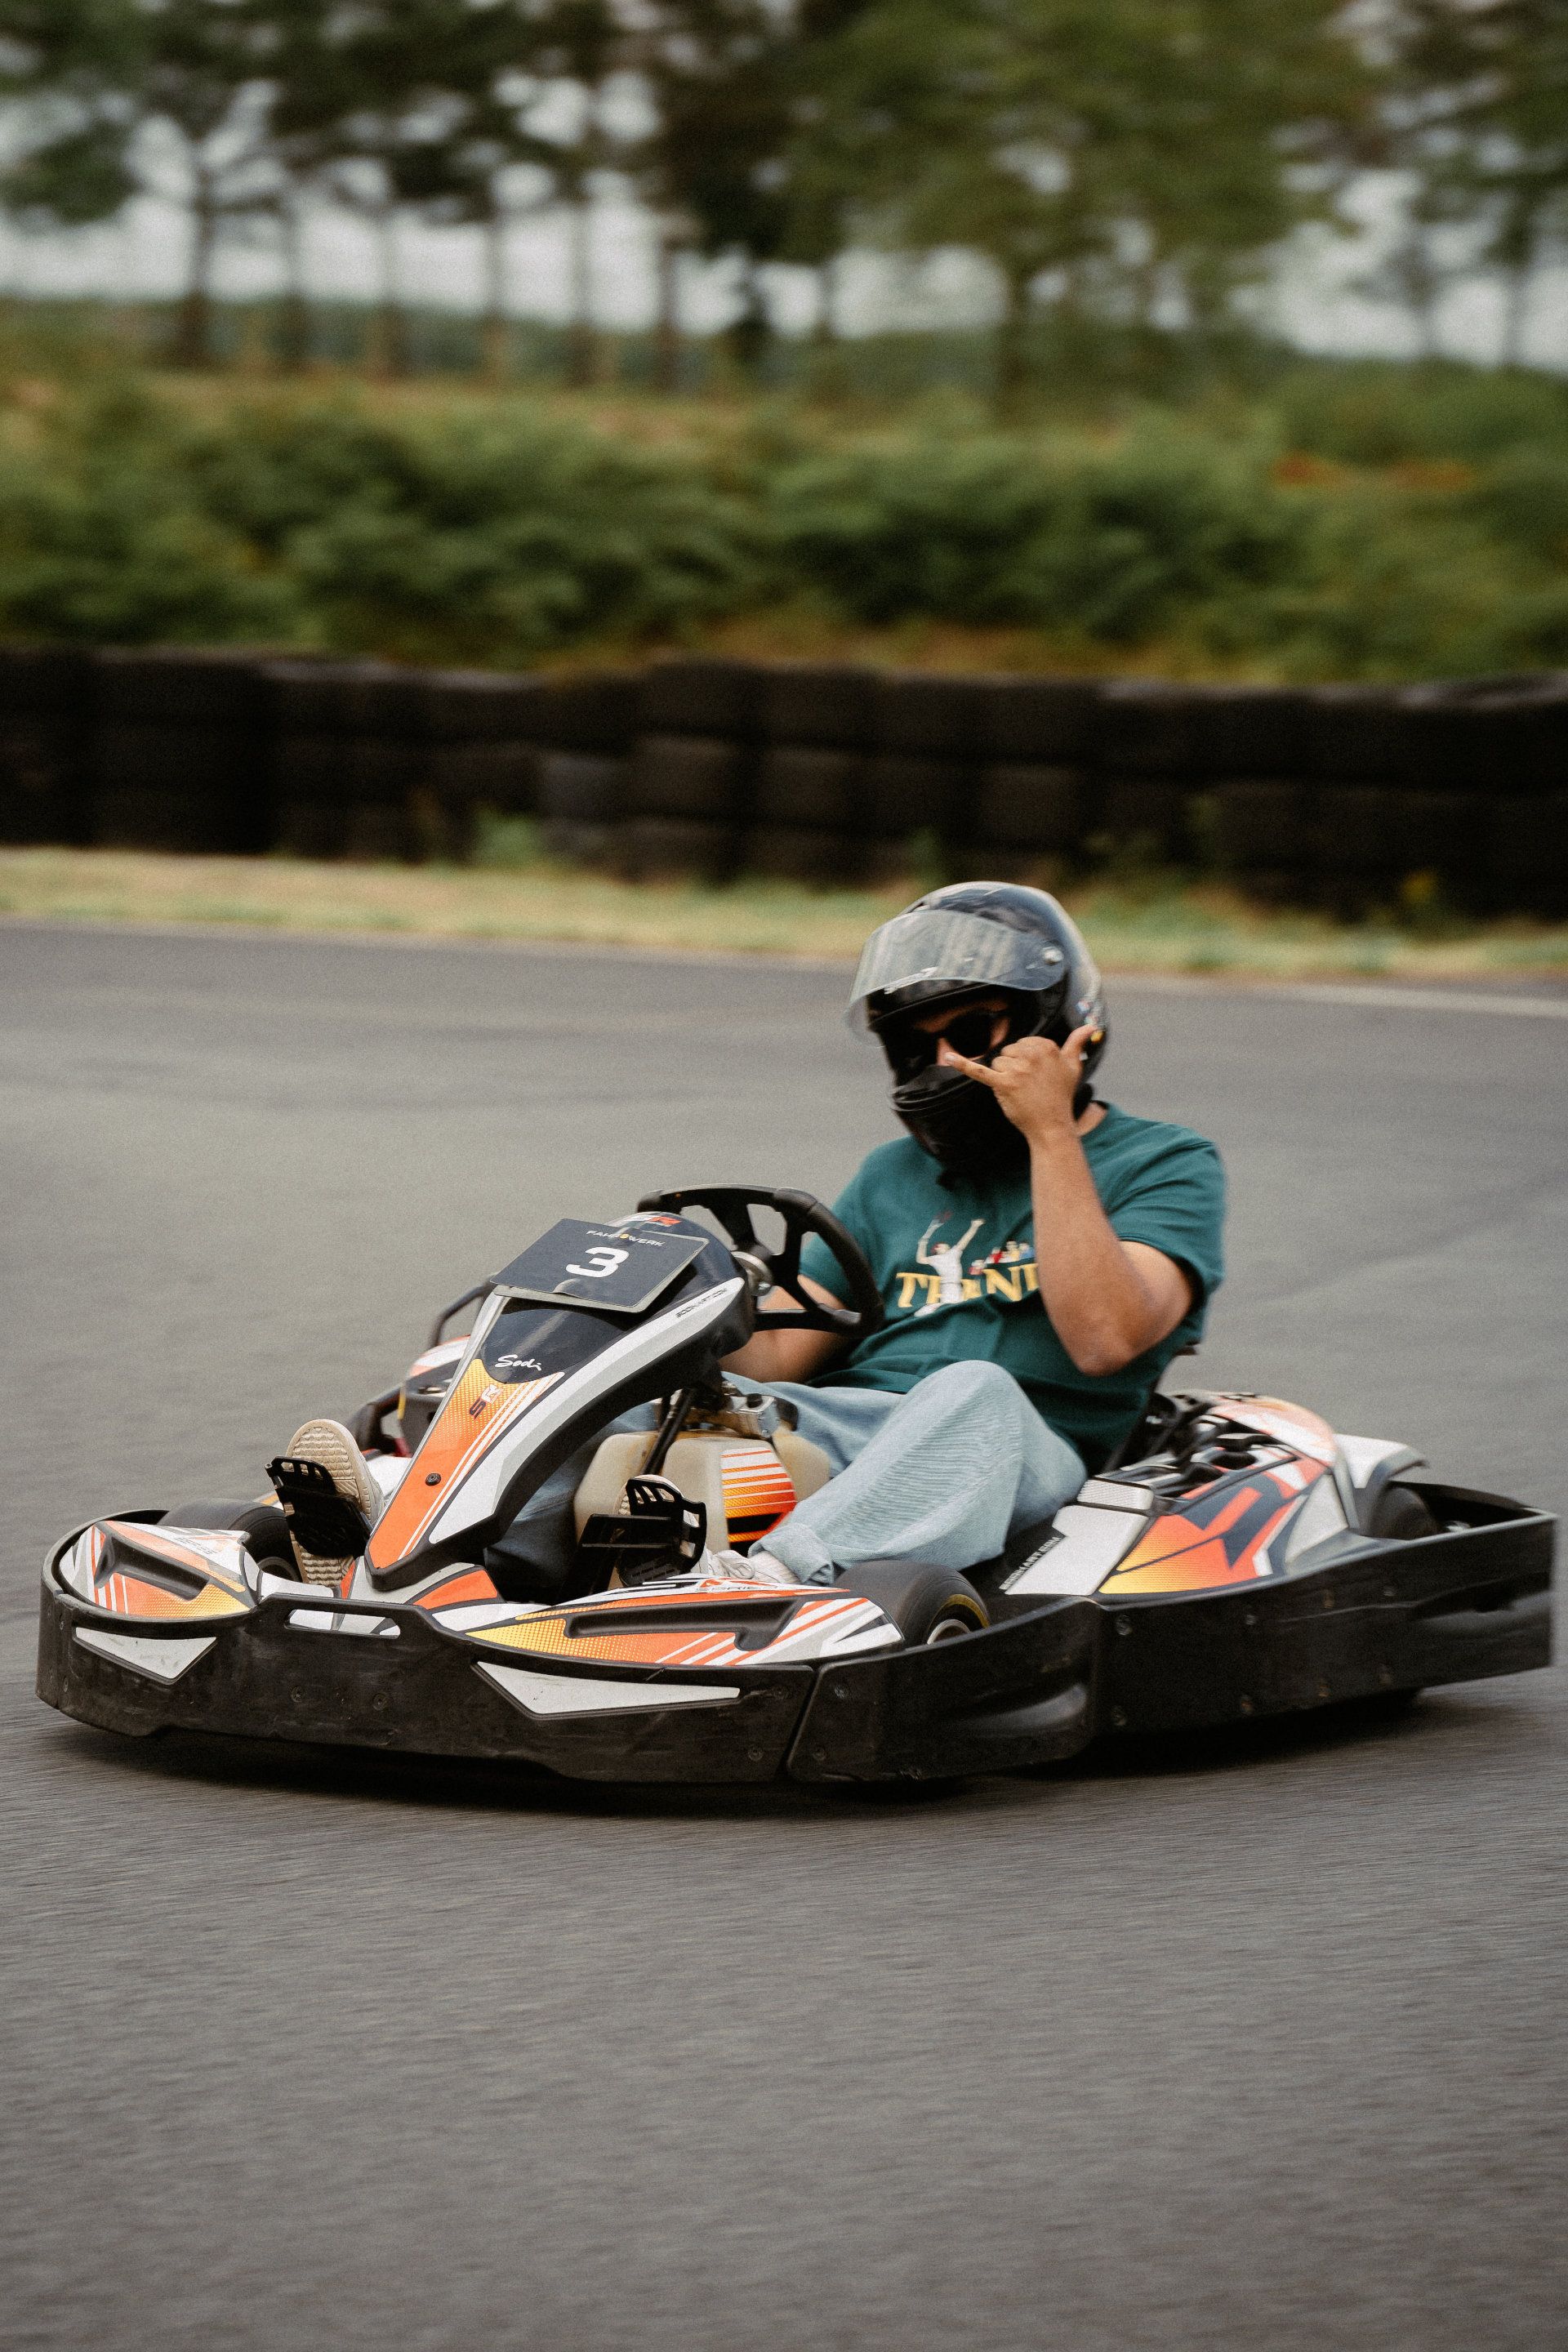 A person wearing a helmet is engaged in an exciting go-kart race, taking a sharp turn on an asphalt track, captured by an Aschaffenburg photographer.